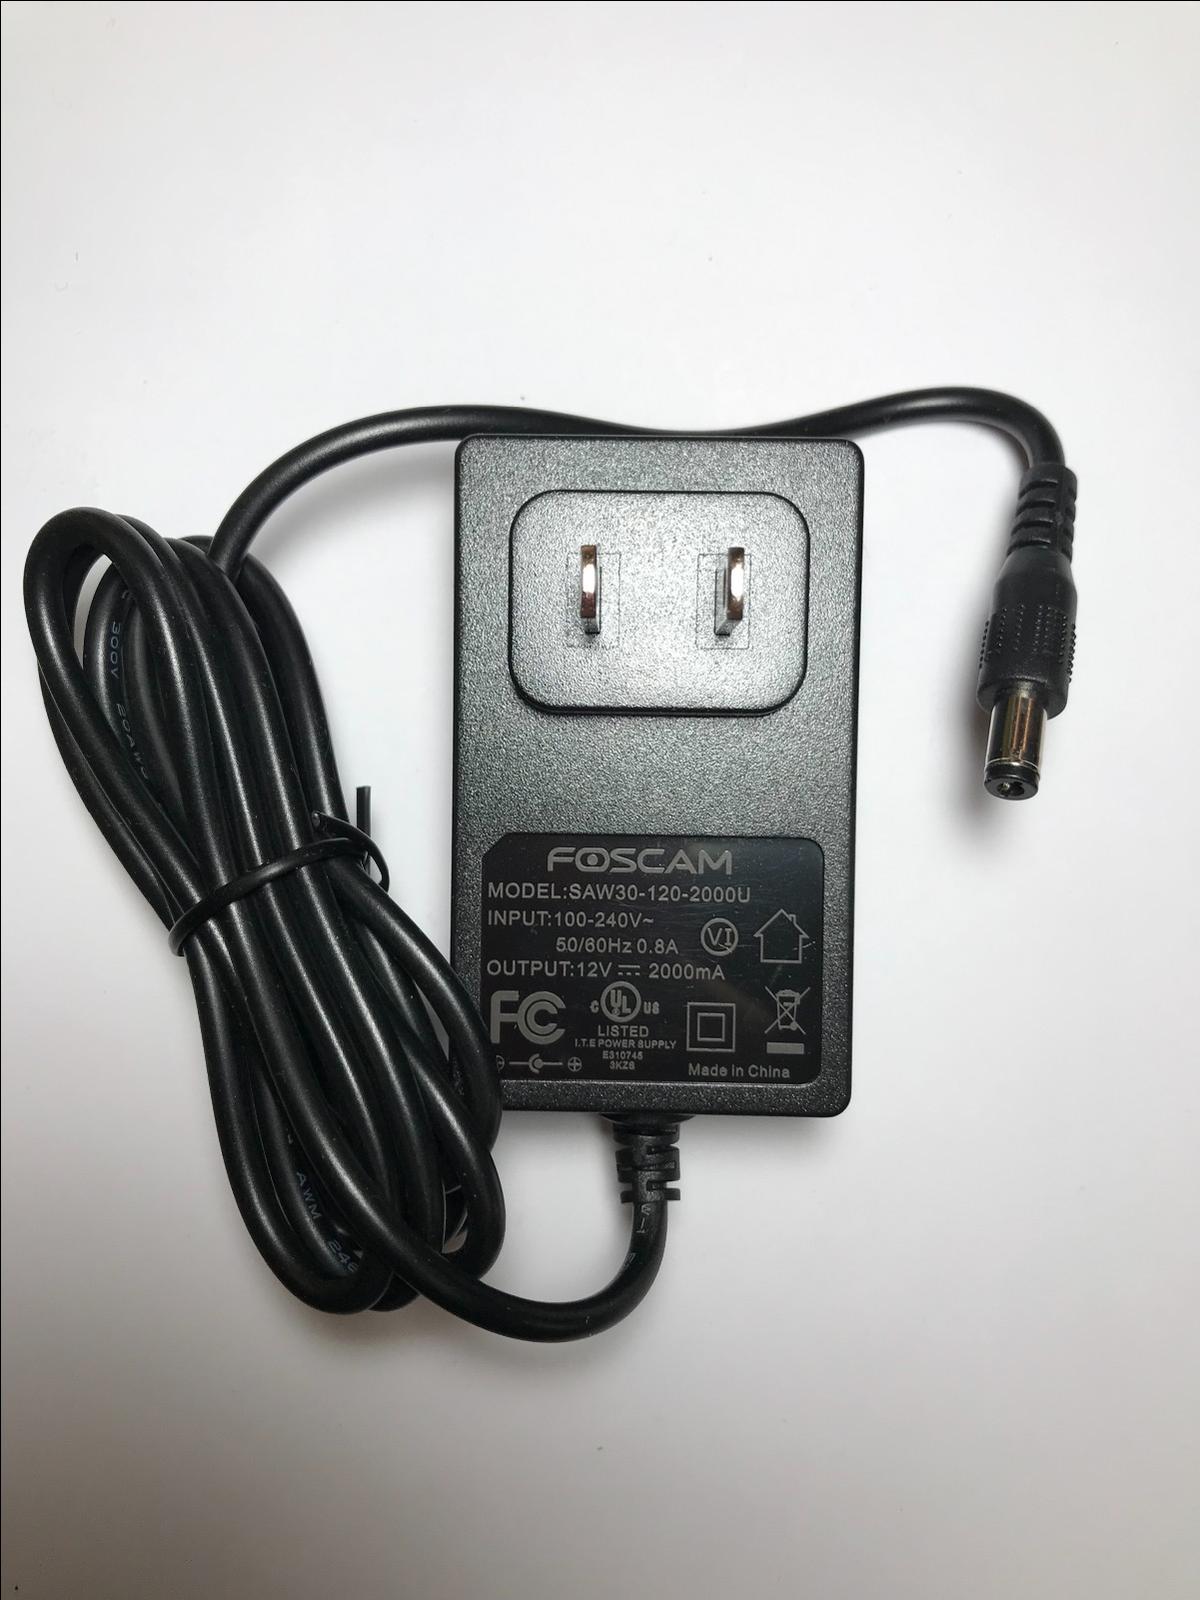 Dual Car Charger, AC Adapter & Cable - iSound